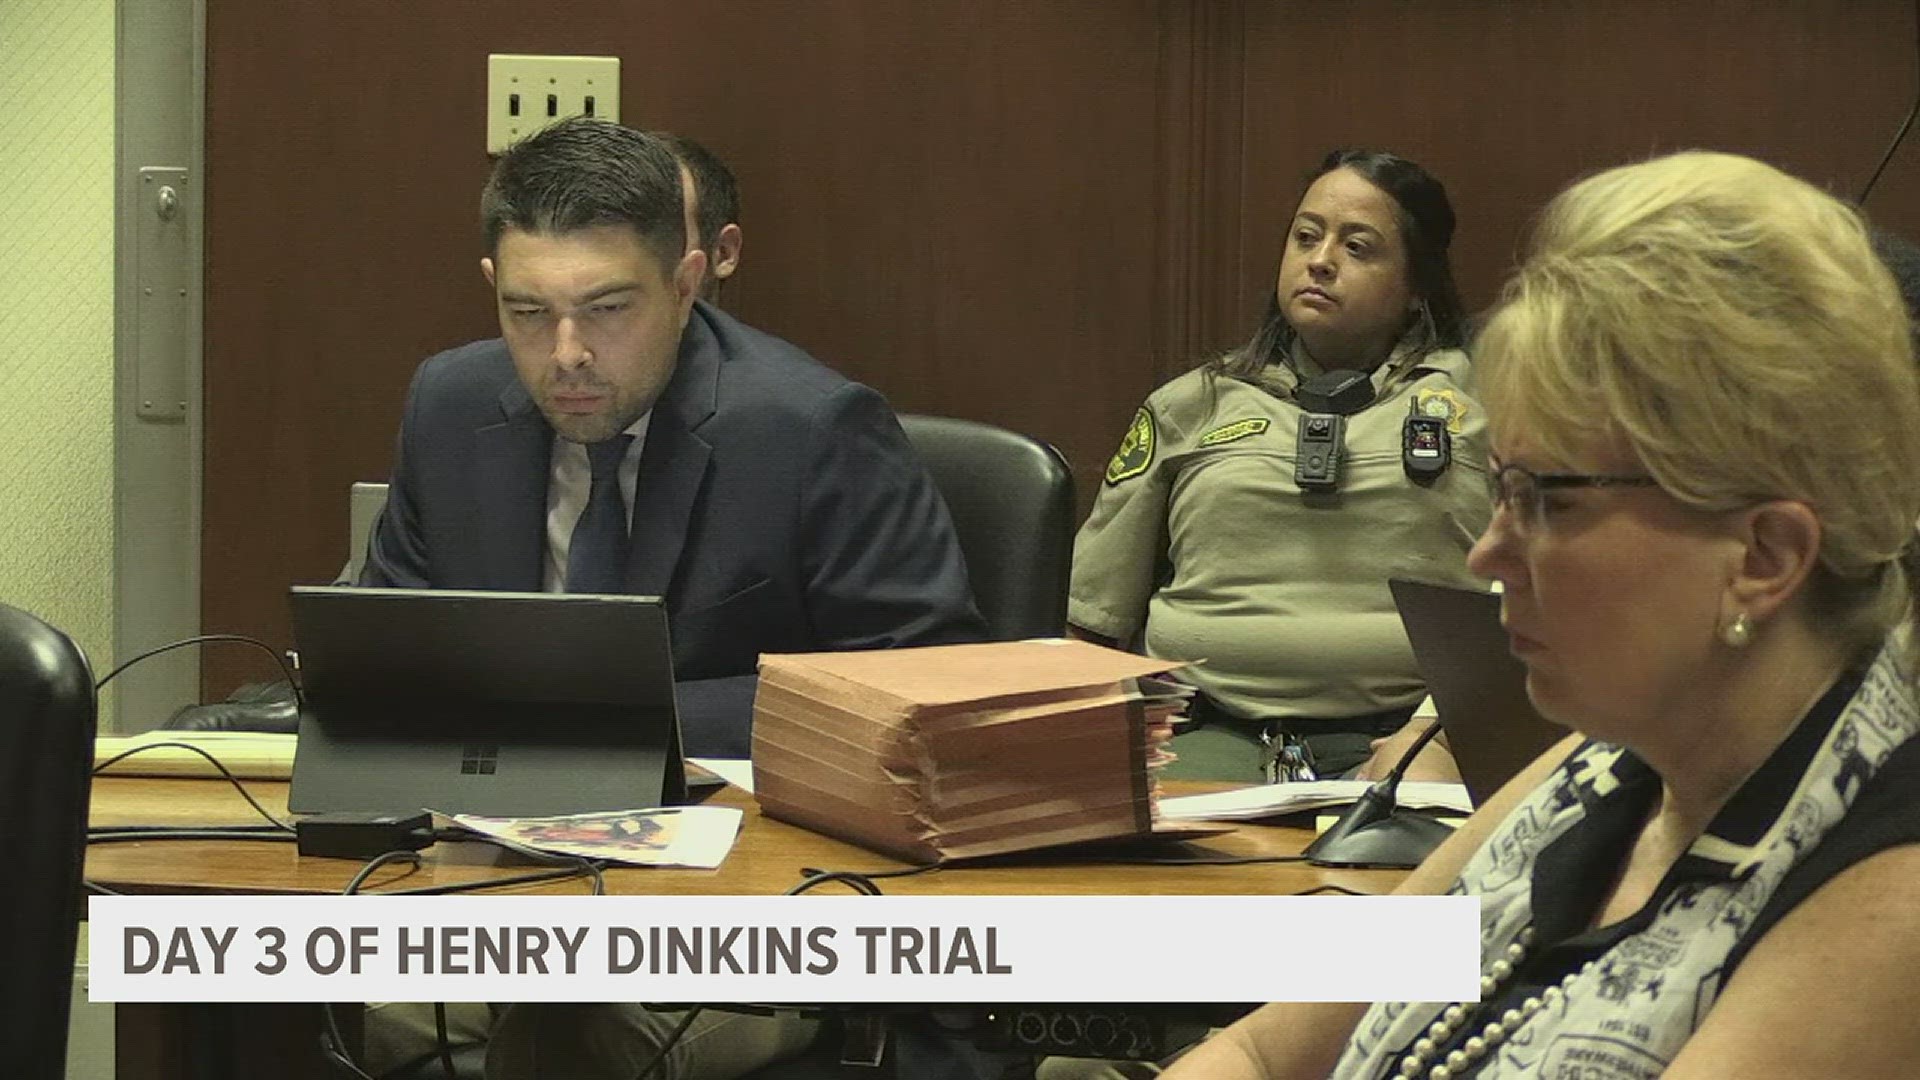 Henry Dinkins' trial continues as his son takes the stand, and a man is arrested after an attempted arson. Also Illinois health officials warn COVID could come back.